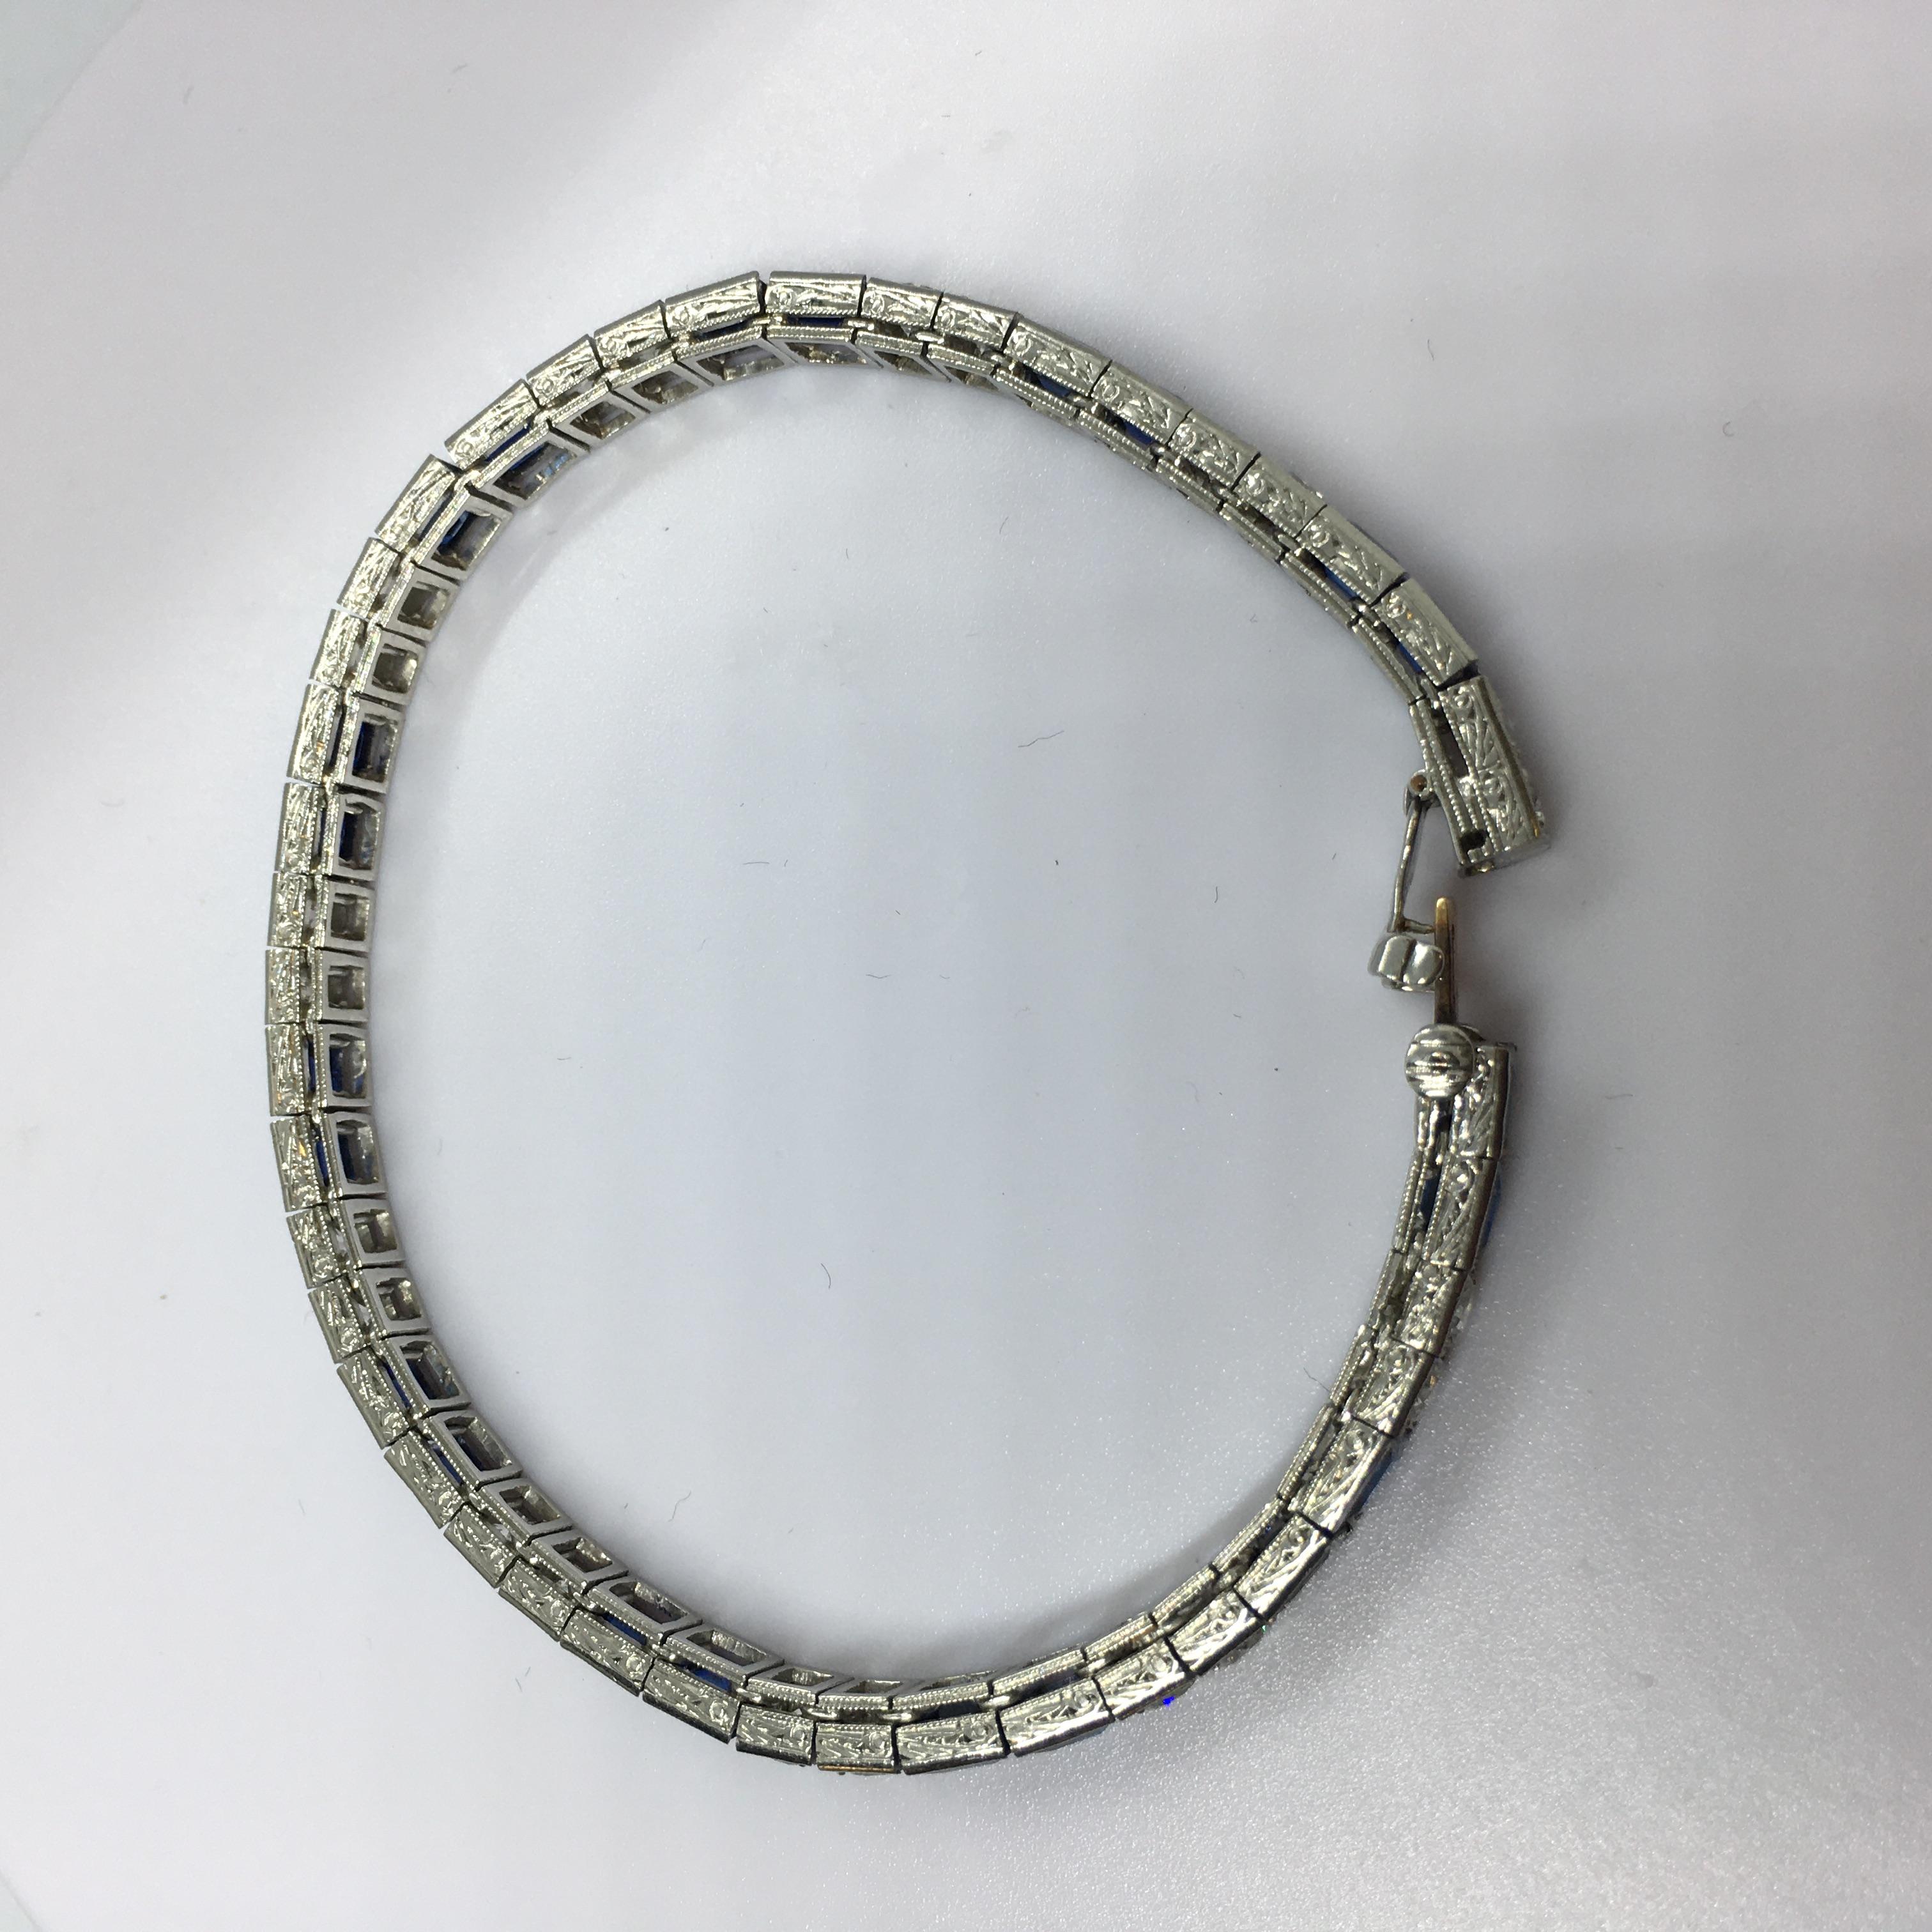 Platinum Art Deco Circa 1920s Tiffany & Co Natural Sapphire Diamond Bracelet

5mm wide
25.9 gram Platinum, tested
7 1/8 inch long
Total of 44 links 22 Sapphire and 22 Diamond
Old European Cut Diamonds 4 mm round, prong set, E-F color VS1 clarity or